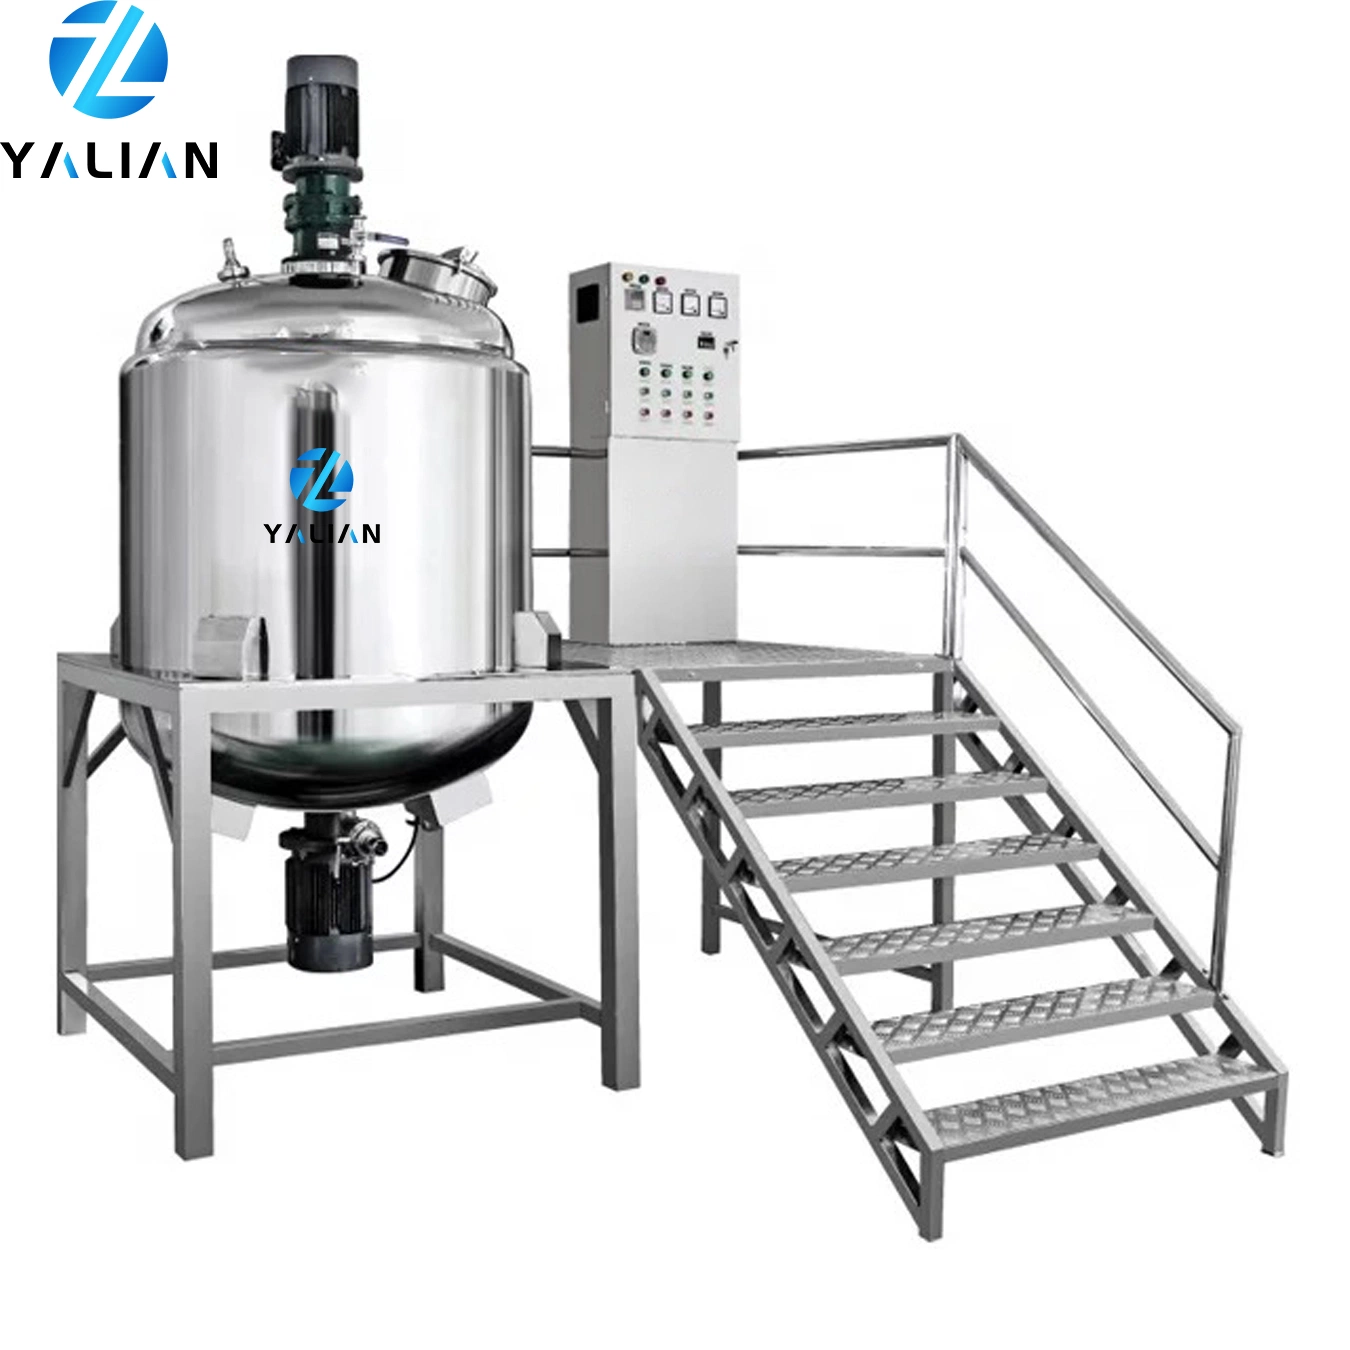 Chemical Reactor Stainless Steel Chemical Reactor Prices